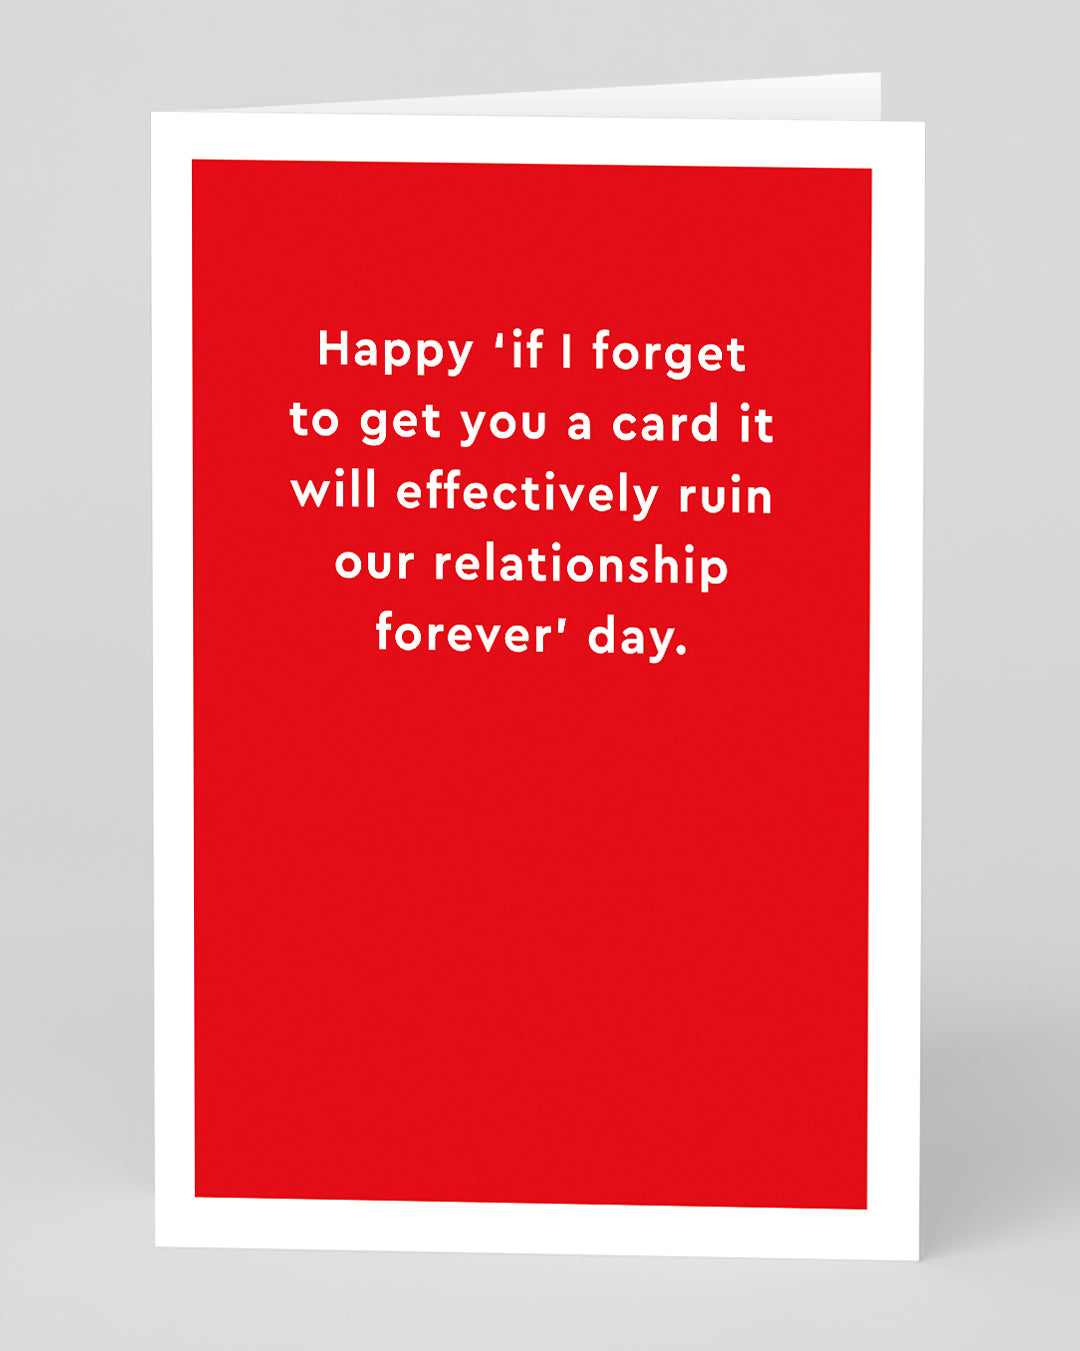 Valentine’s Day | Funny Valentines Card For Her or Him | Personalised Ruin Our Relationship Day Card | Ohh Deer Unique Valentine’s Card | Artwork by Technically Ron | Made In The UK, Eco-Friendly Materials, Plastic Free Packaging